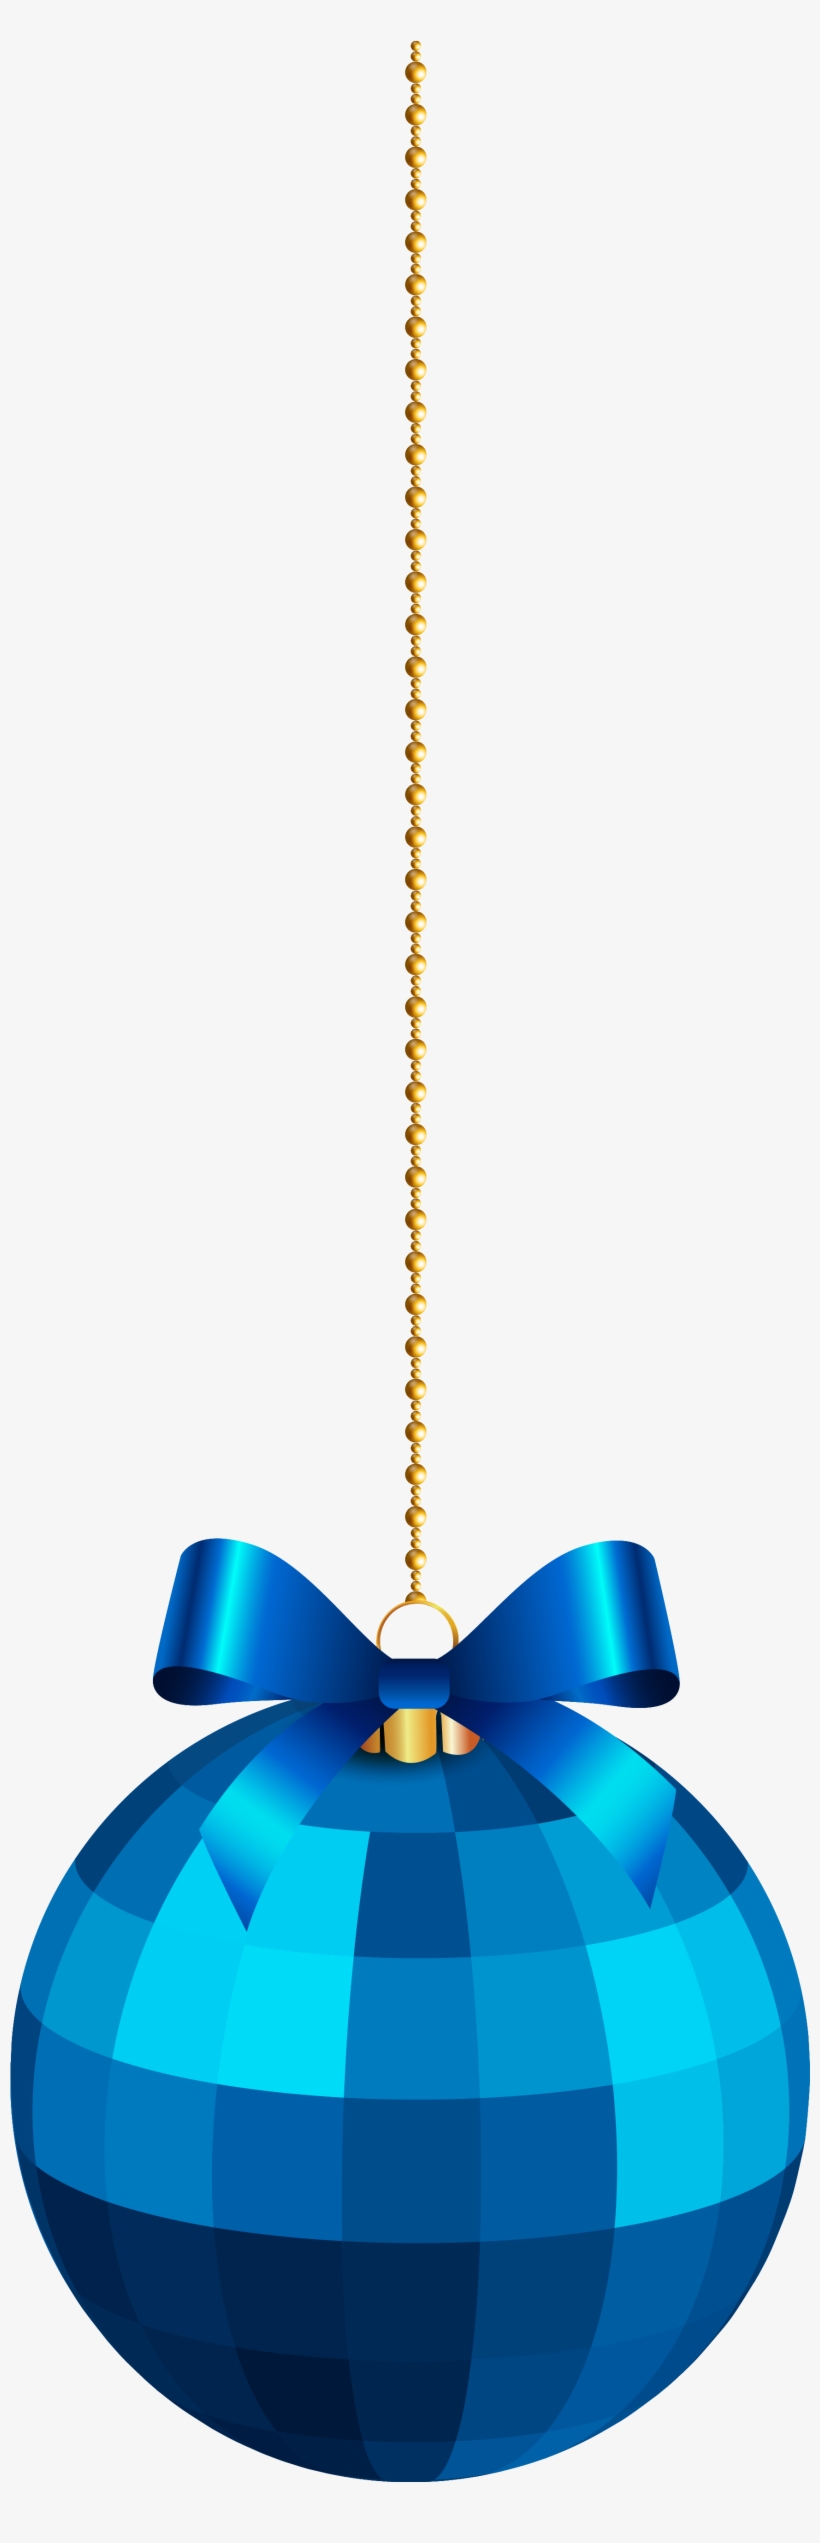 Hanging Christmas Ornaments Png Download - Blue Christmas Ball Hanging, transparent png #717417